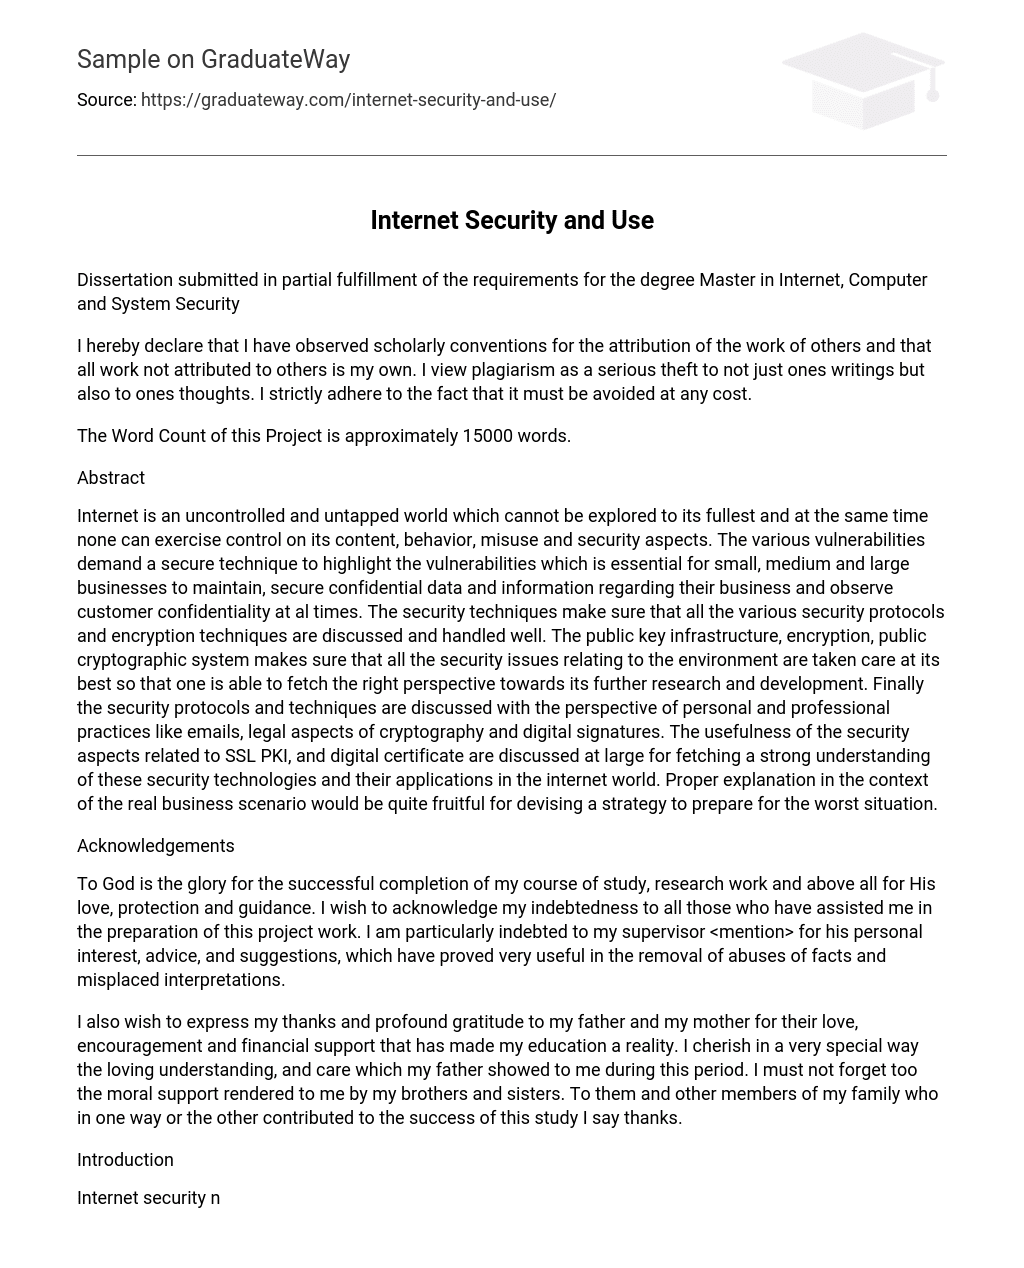 Internet Security and Use